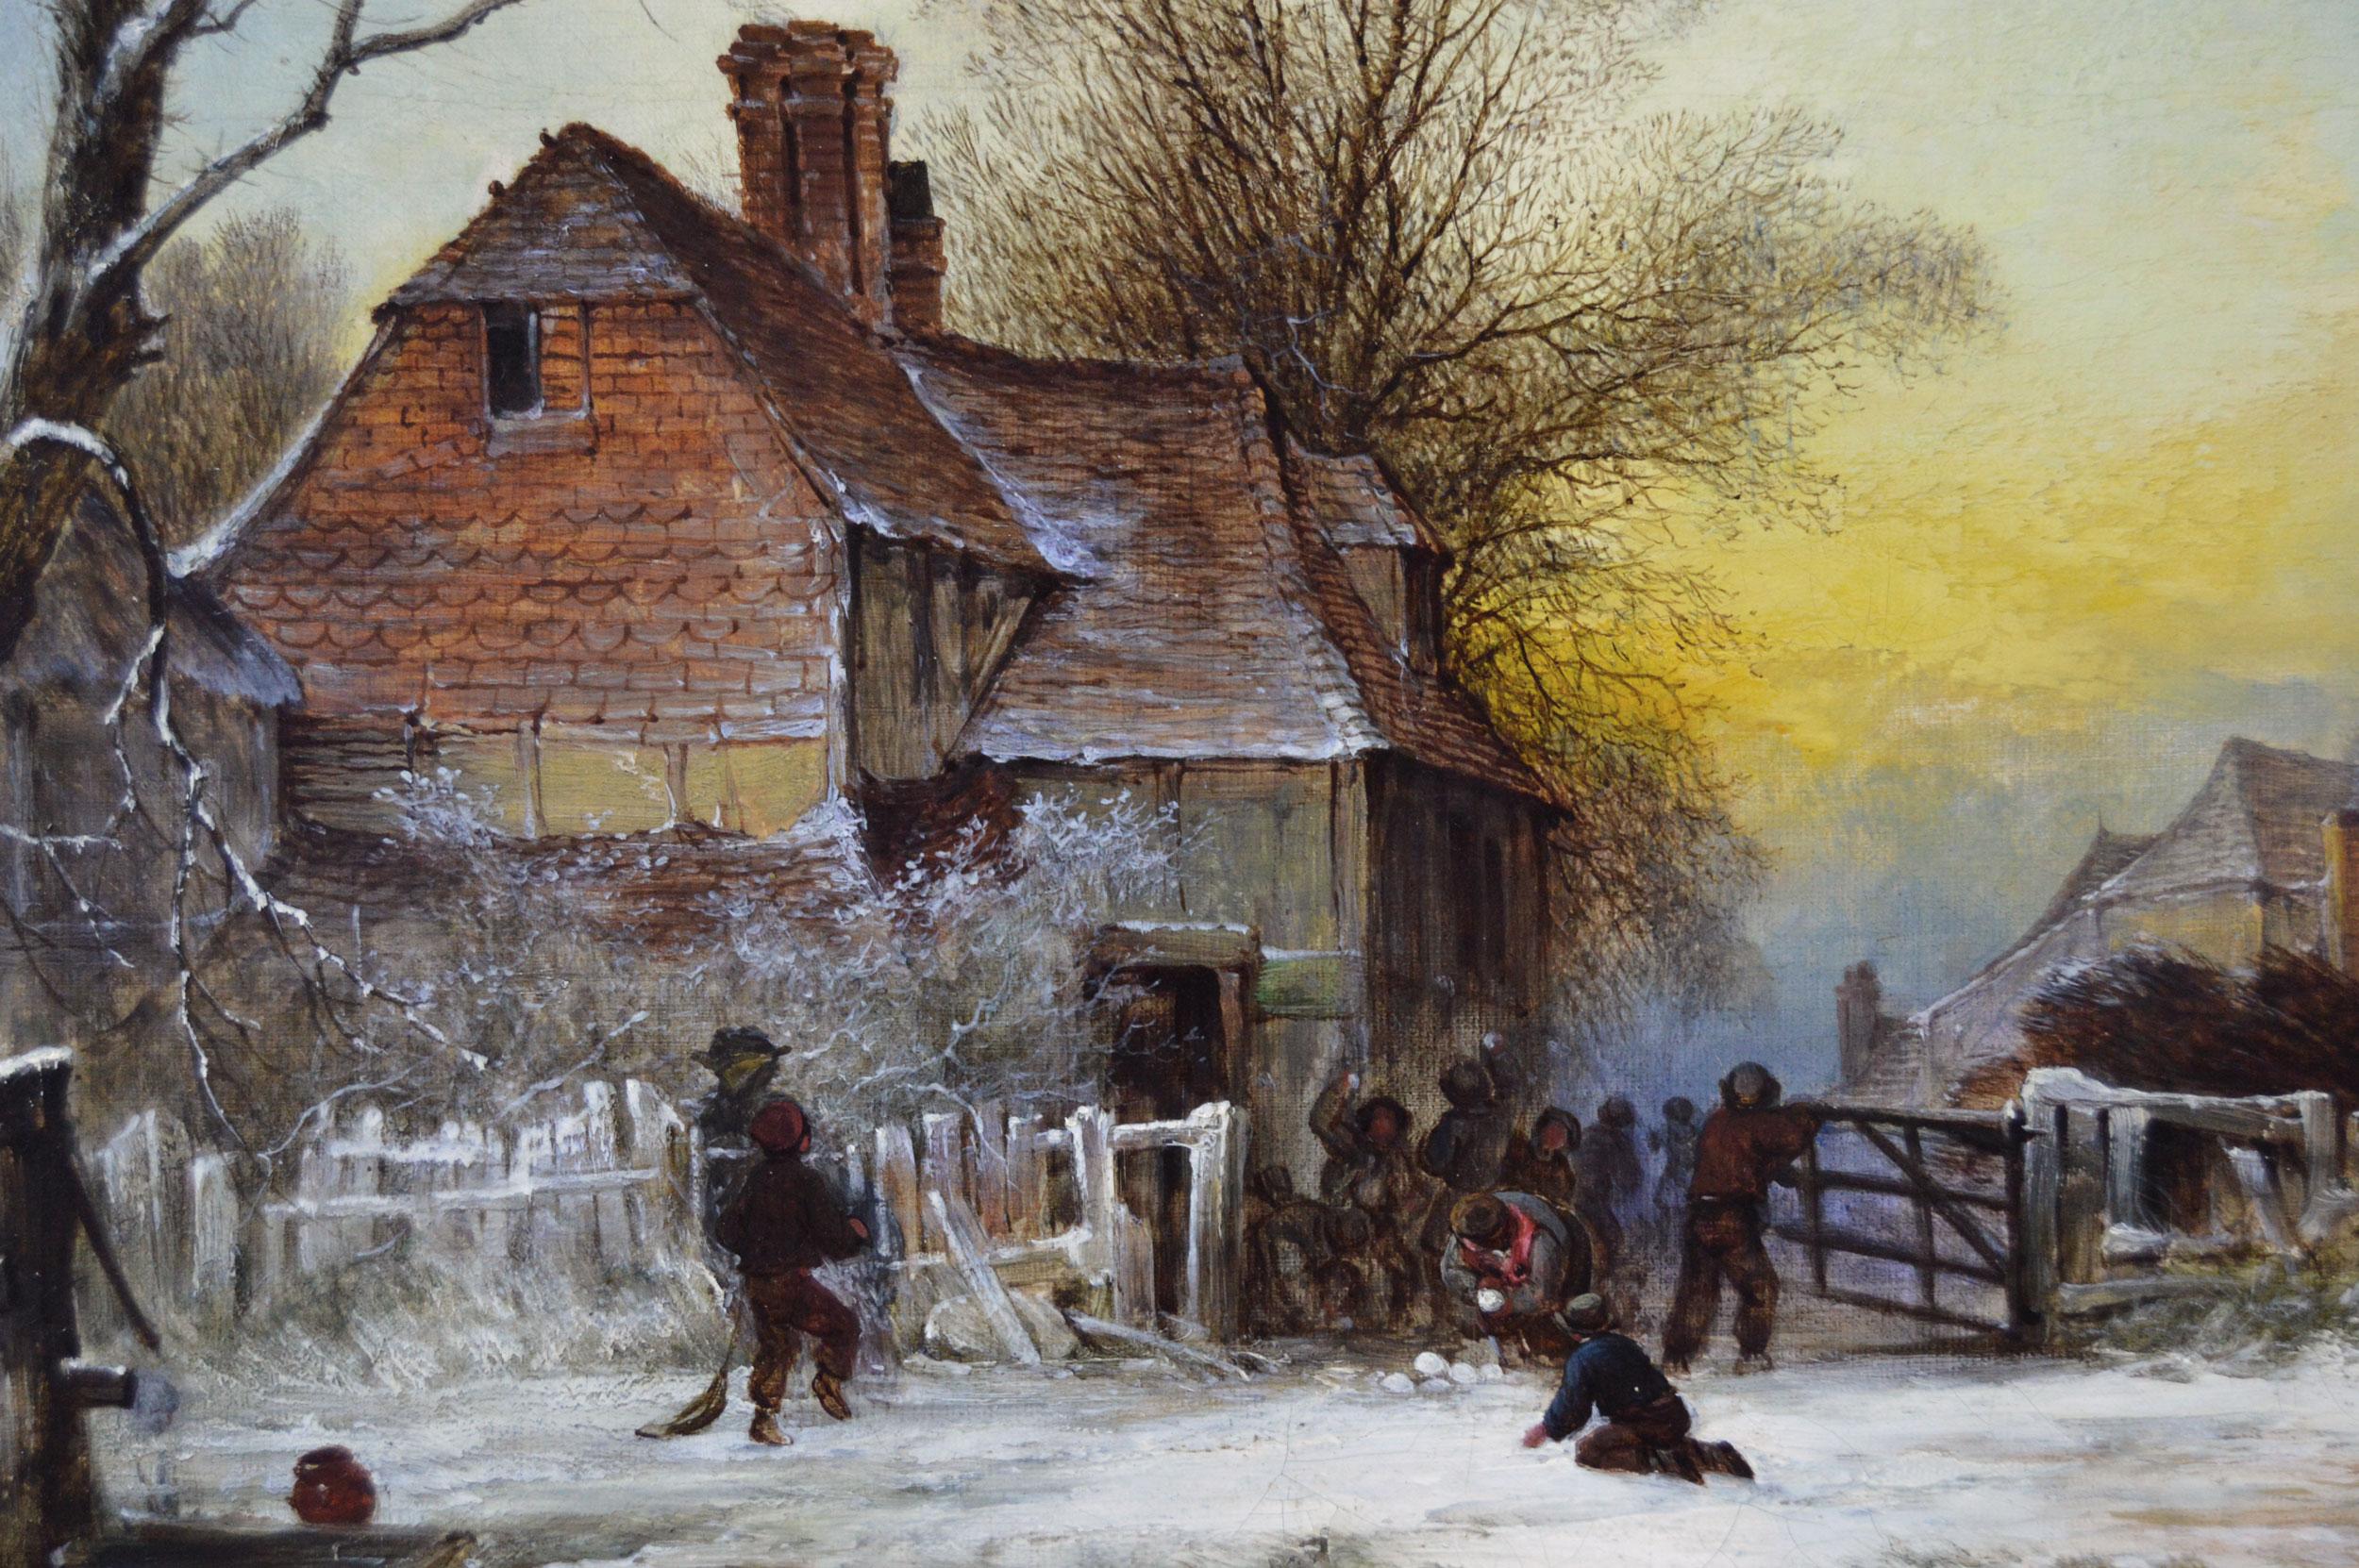 **PLEASE NOTE: EACH PAINTING INCLUDING THE FRAME MEASURES 13.5 INCHES X 19.5 INCHES**

George Augustus Williams
British, (1814-1901)
Winter in the Village & The Snowball Fight
Oil on canvas, pair, both signed with monogram
Image size: 7.5 inches x